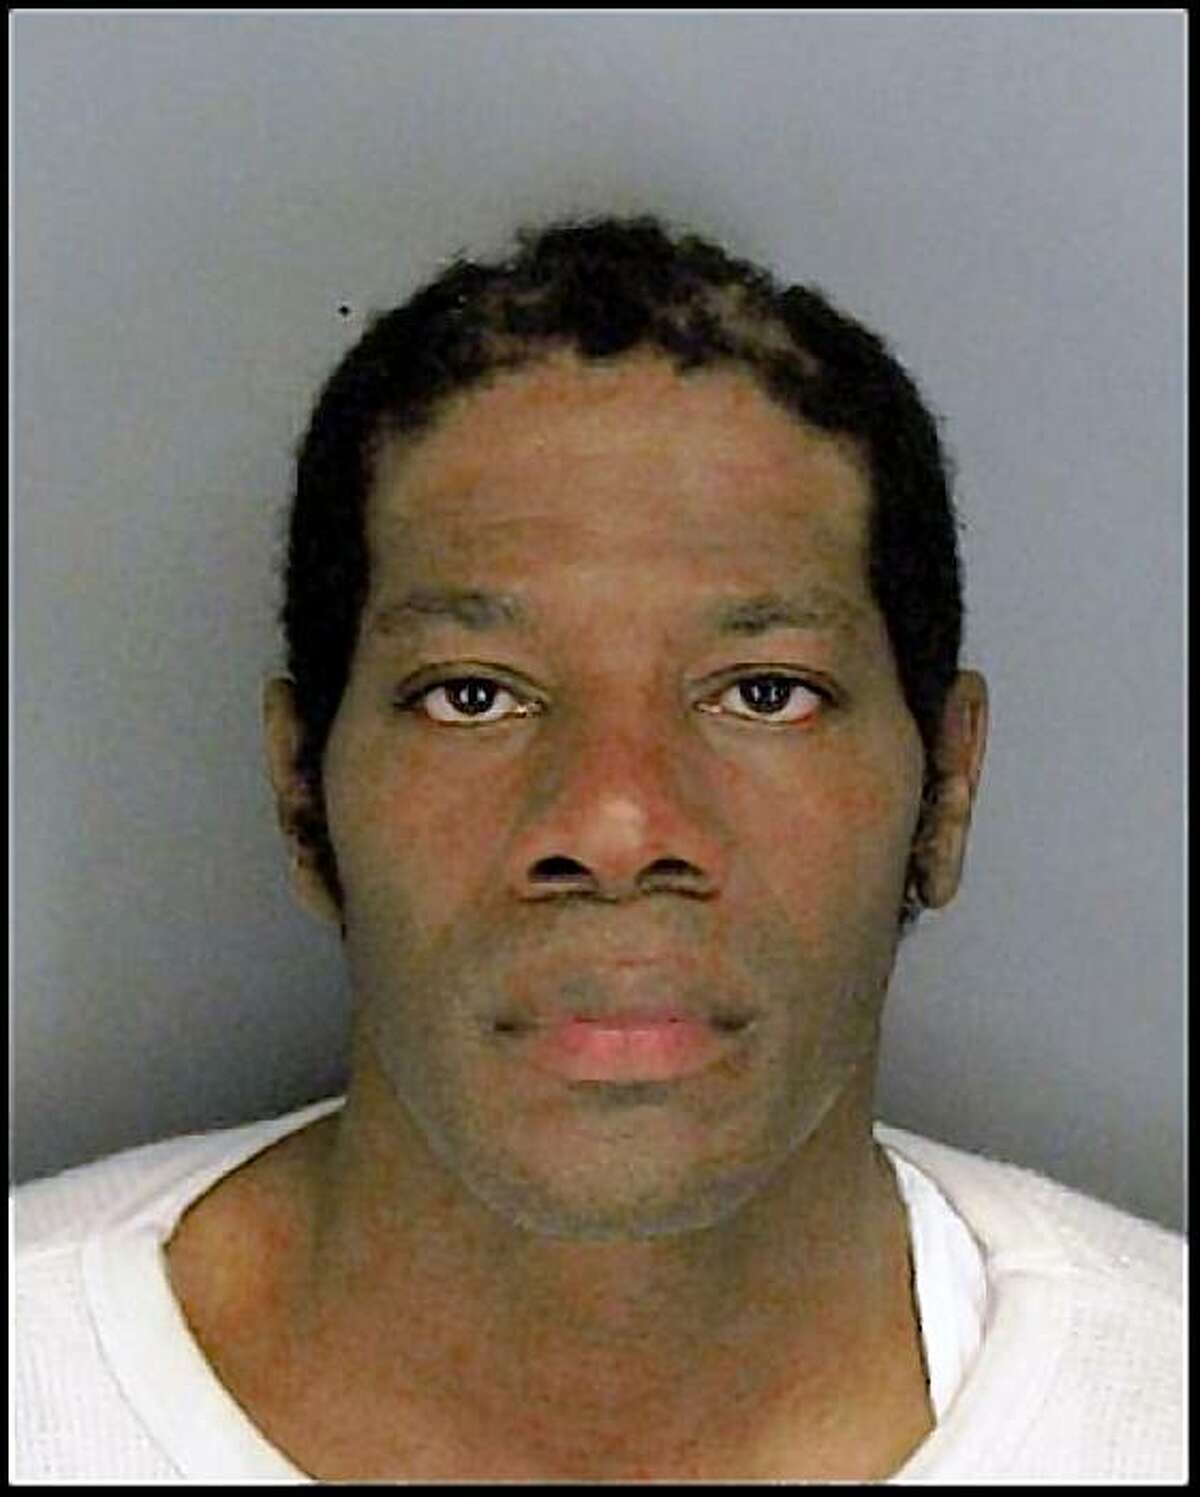 This Placer County Jail booking photo shows Nathaniel Burris on Wednesday, August 12, 2009. Burris, accused of killing his ex-girlfriend and her male friend at the Richmond-San Rafael Bridge toll plaza, insisted on pleading guilty during a brief court hearing in Martinez, Calif., on August 14, 2009.